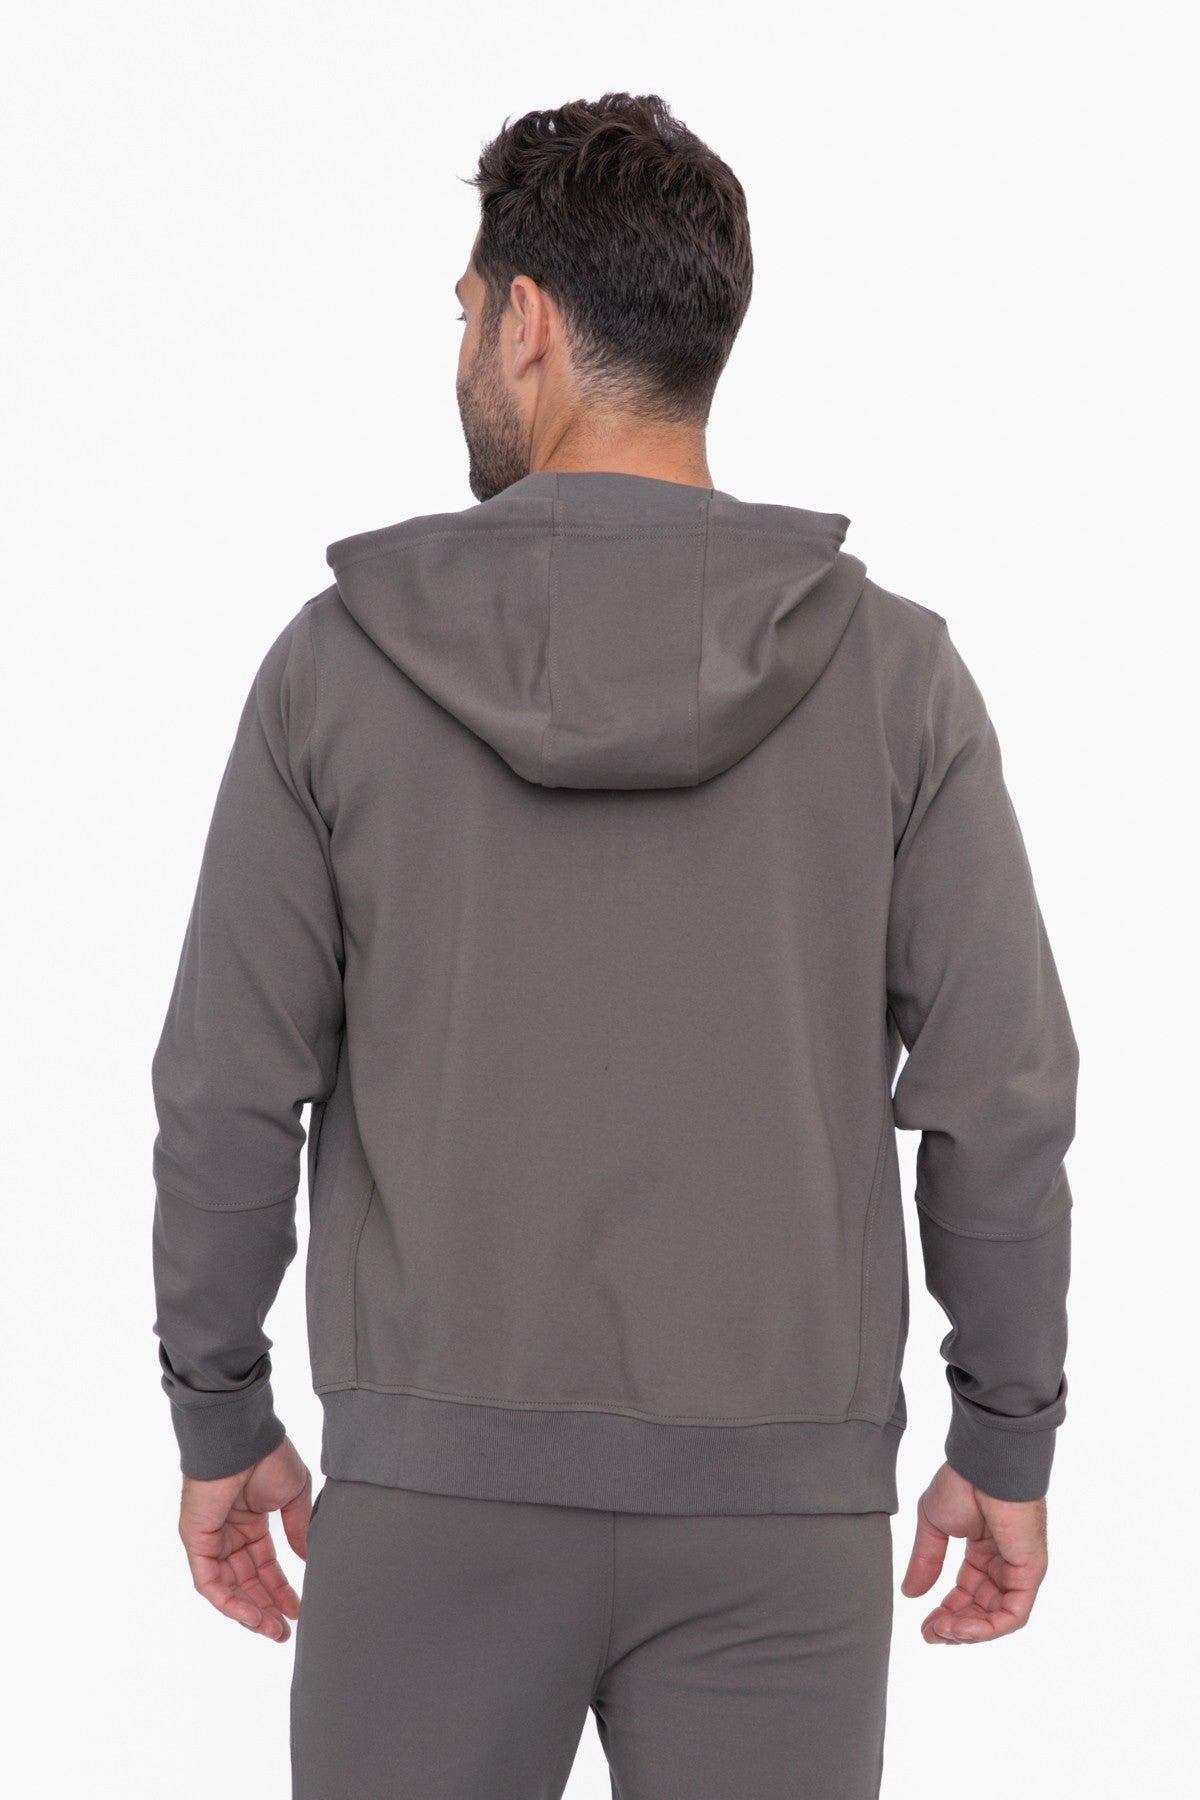 Fitted Knit Zip up Performance Hoodie